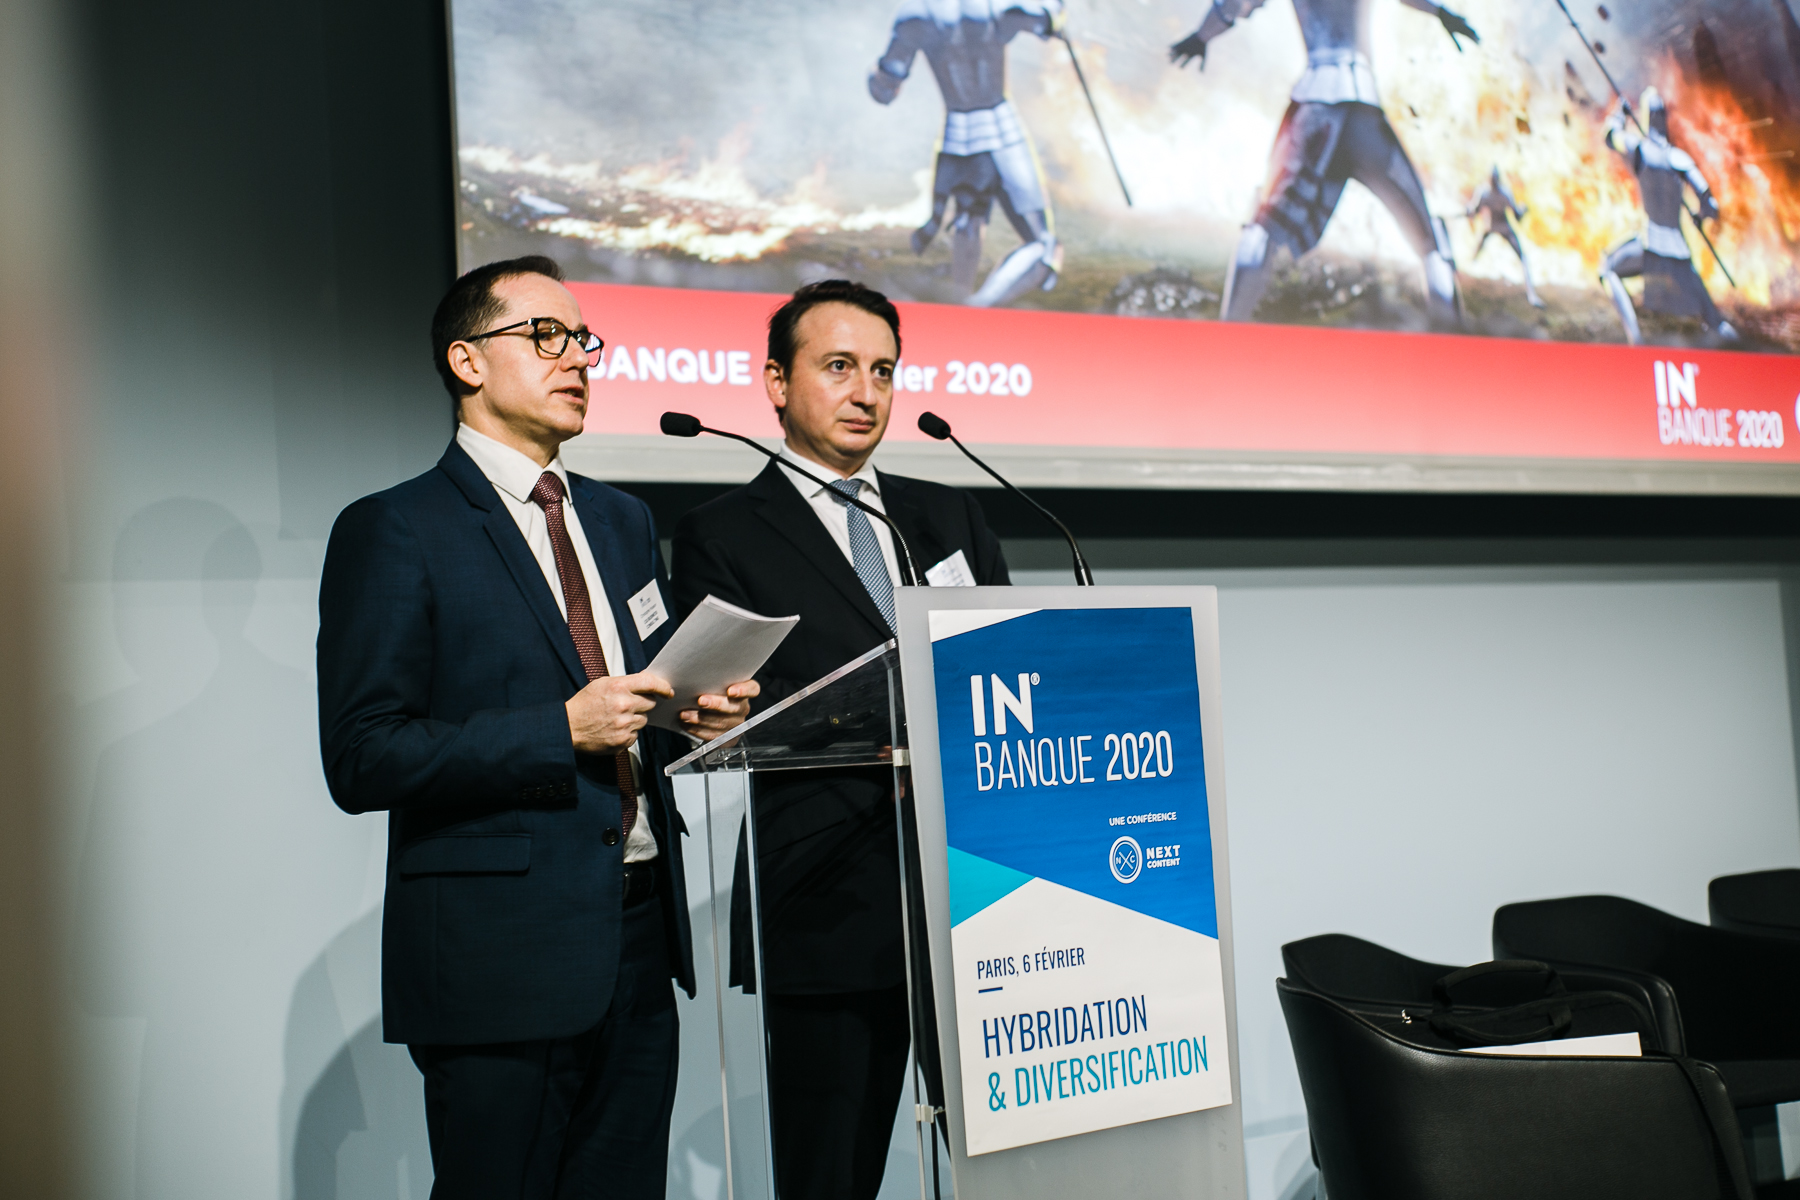 Christophe Husson et Olivier Dondeyne (CGI Business Consulting) - IN BANQUE 2020 - Crédit photo : Guillermo Gomez